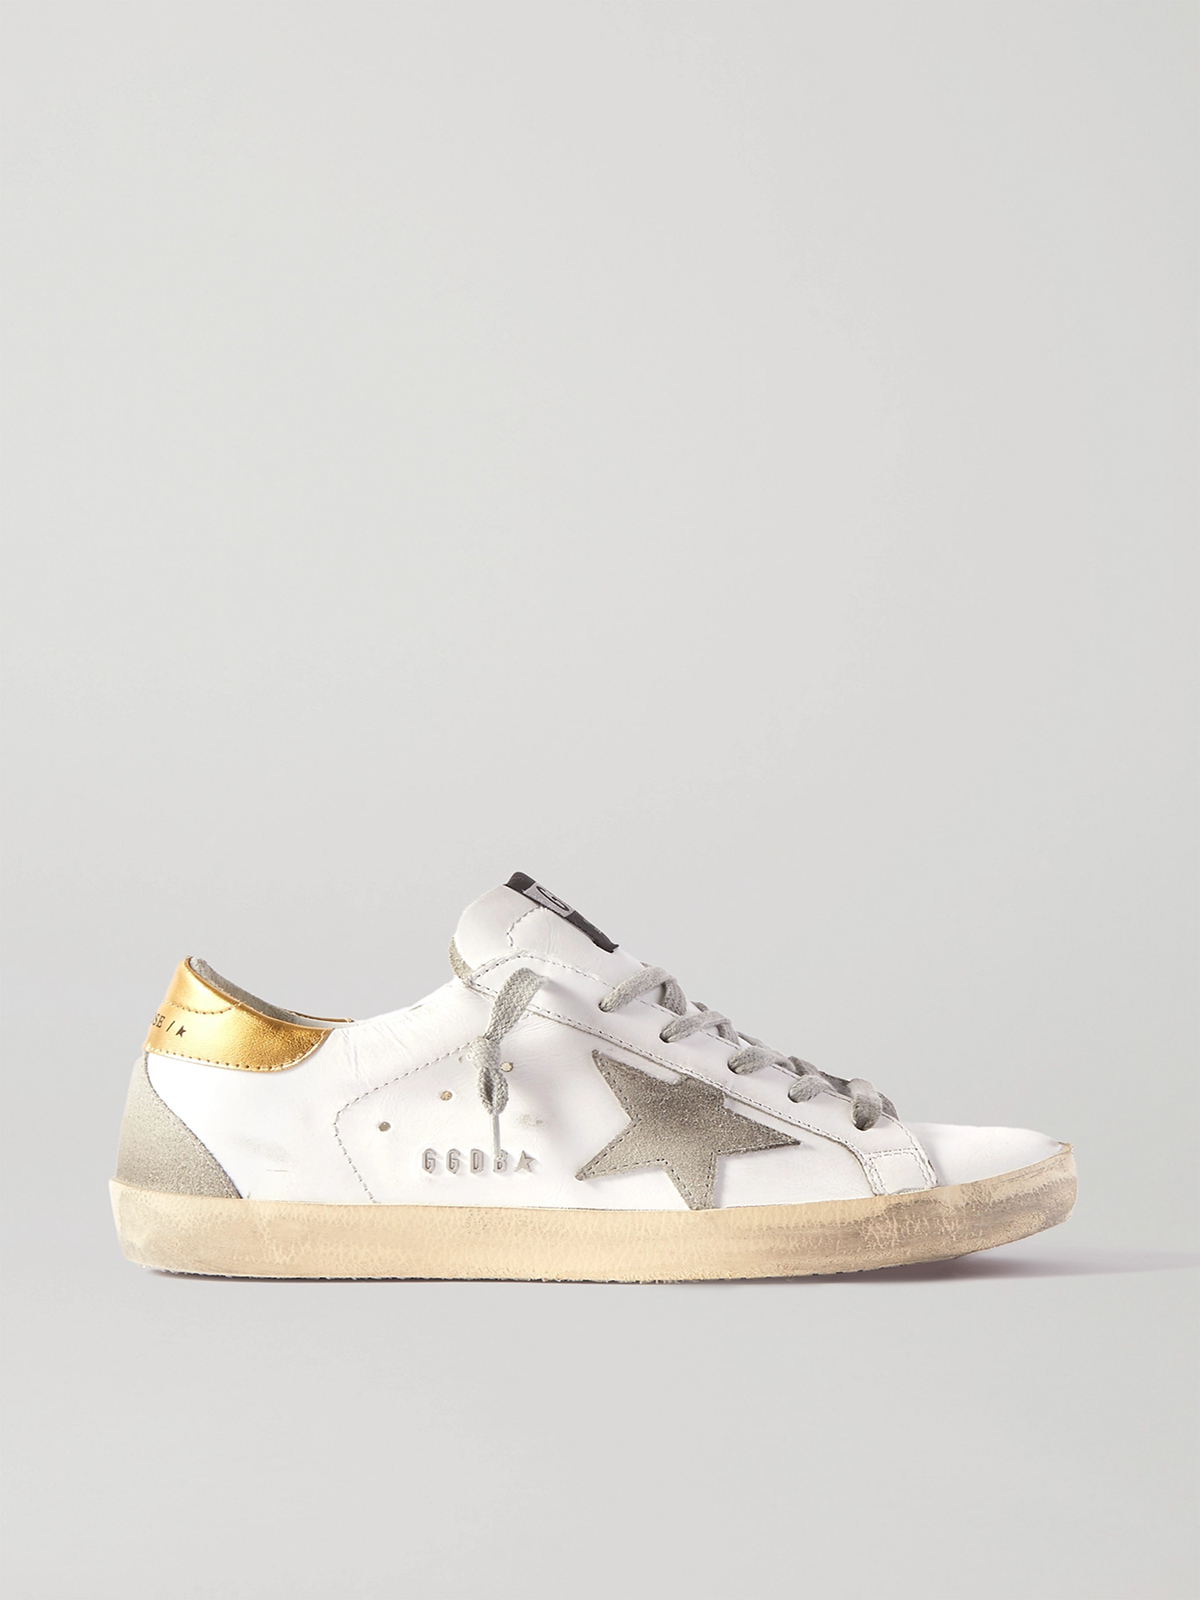 golden goose sneakers distressed leather Superstar and suede